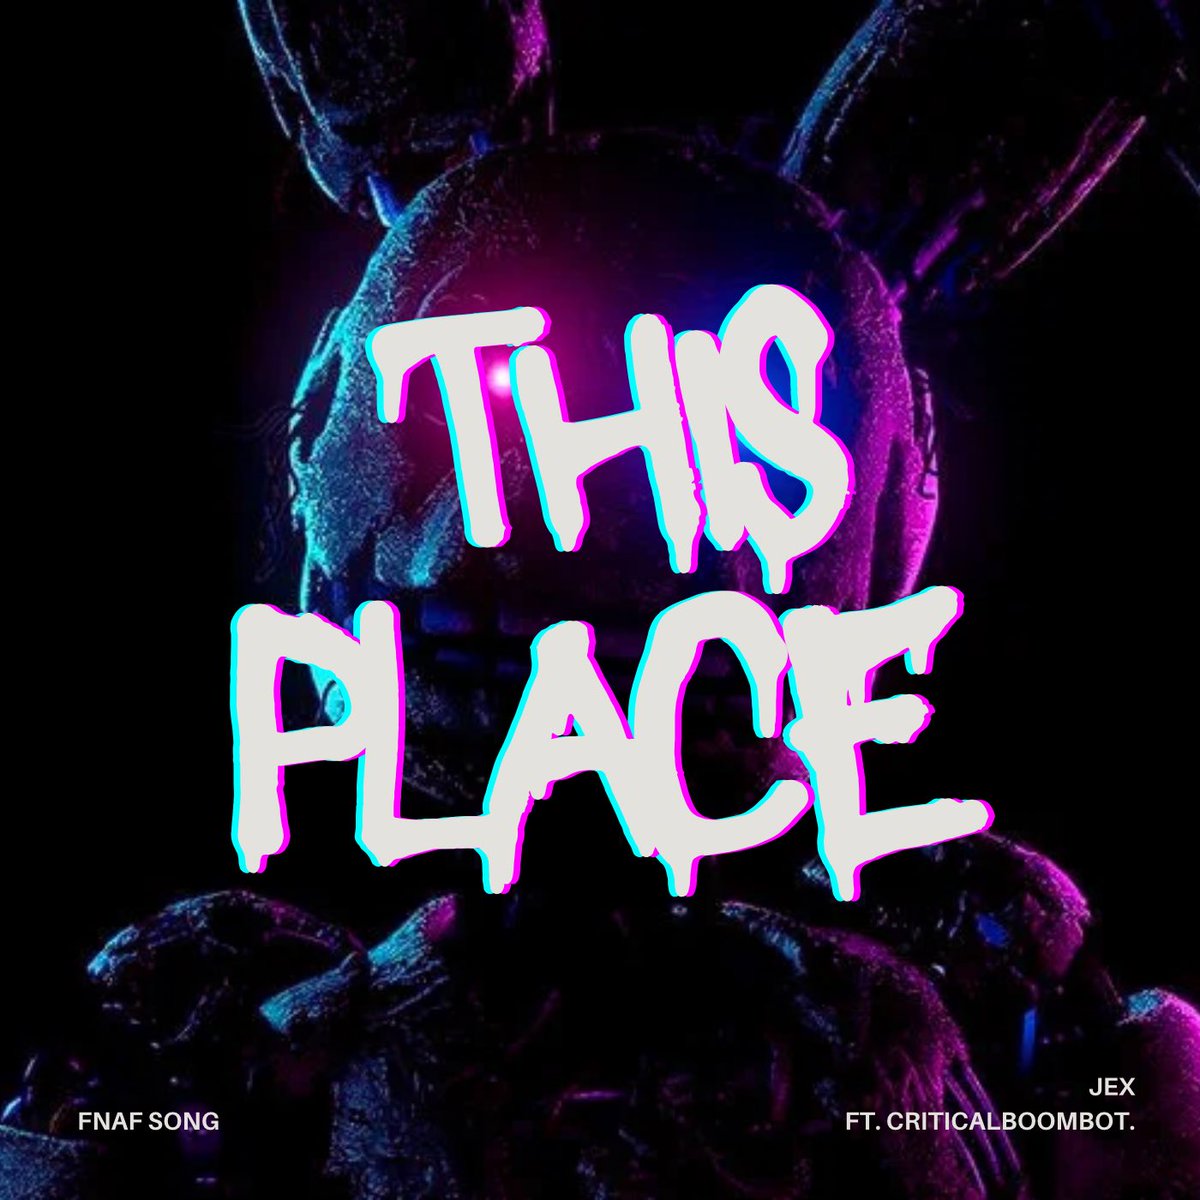 OUT NOW!!! @jexcosplay_00 ft @CriticalBoomBot #fnaf #music #singersongwriter #thisplace 

open.spotify.com/track/6js61eCq…